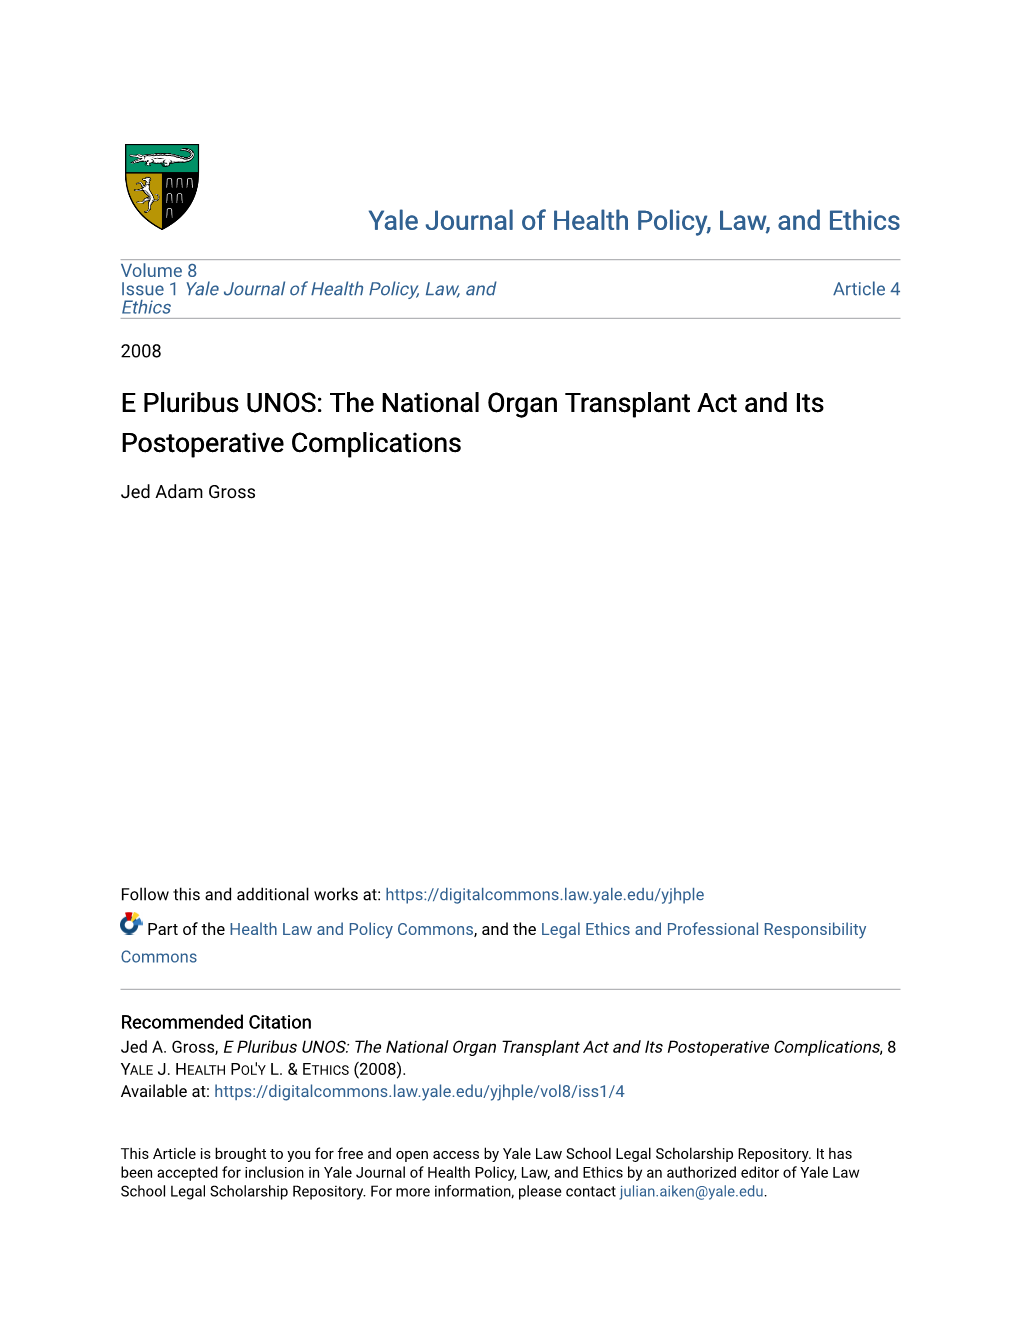 E Pluribus UNOS: the National Organ Transplant Act and Its Postoperative Complications